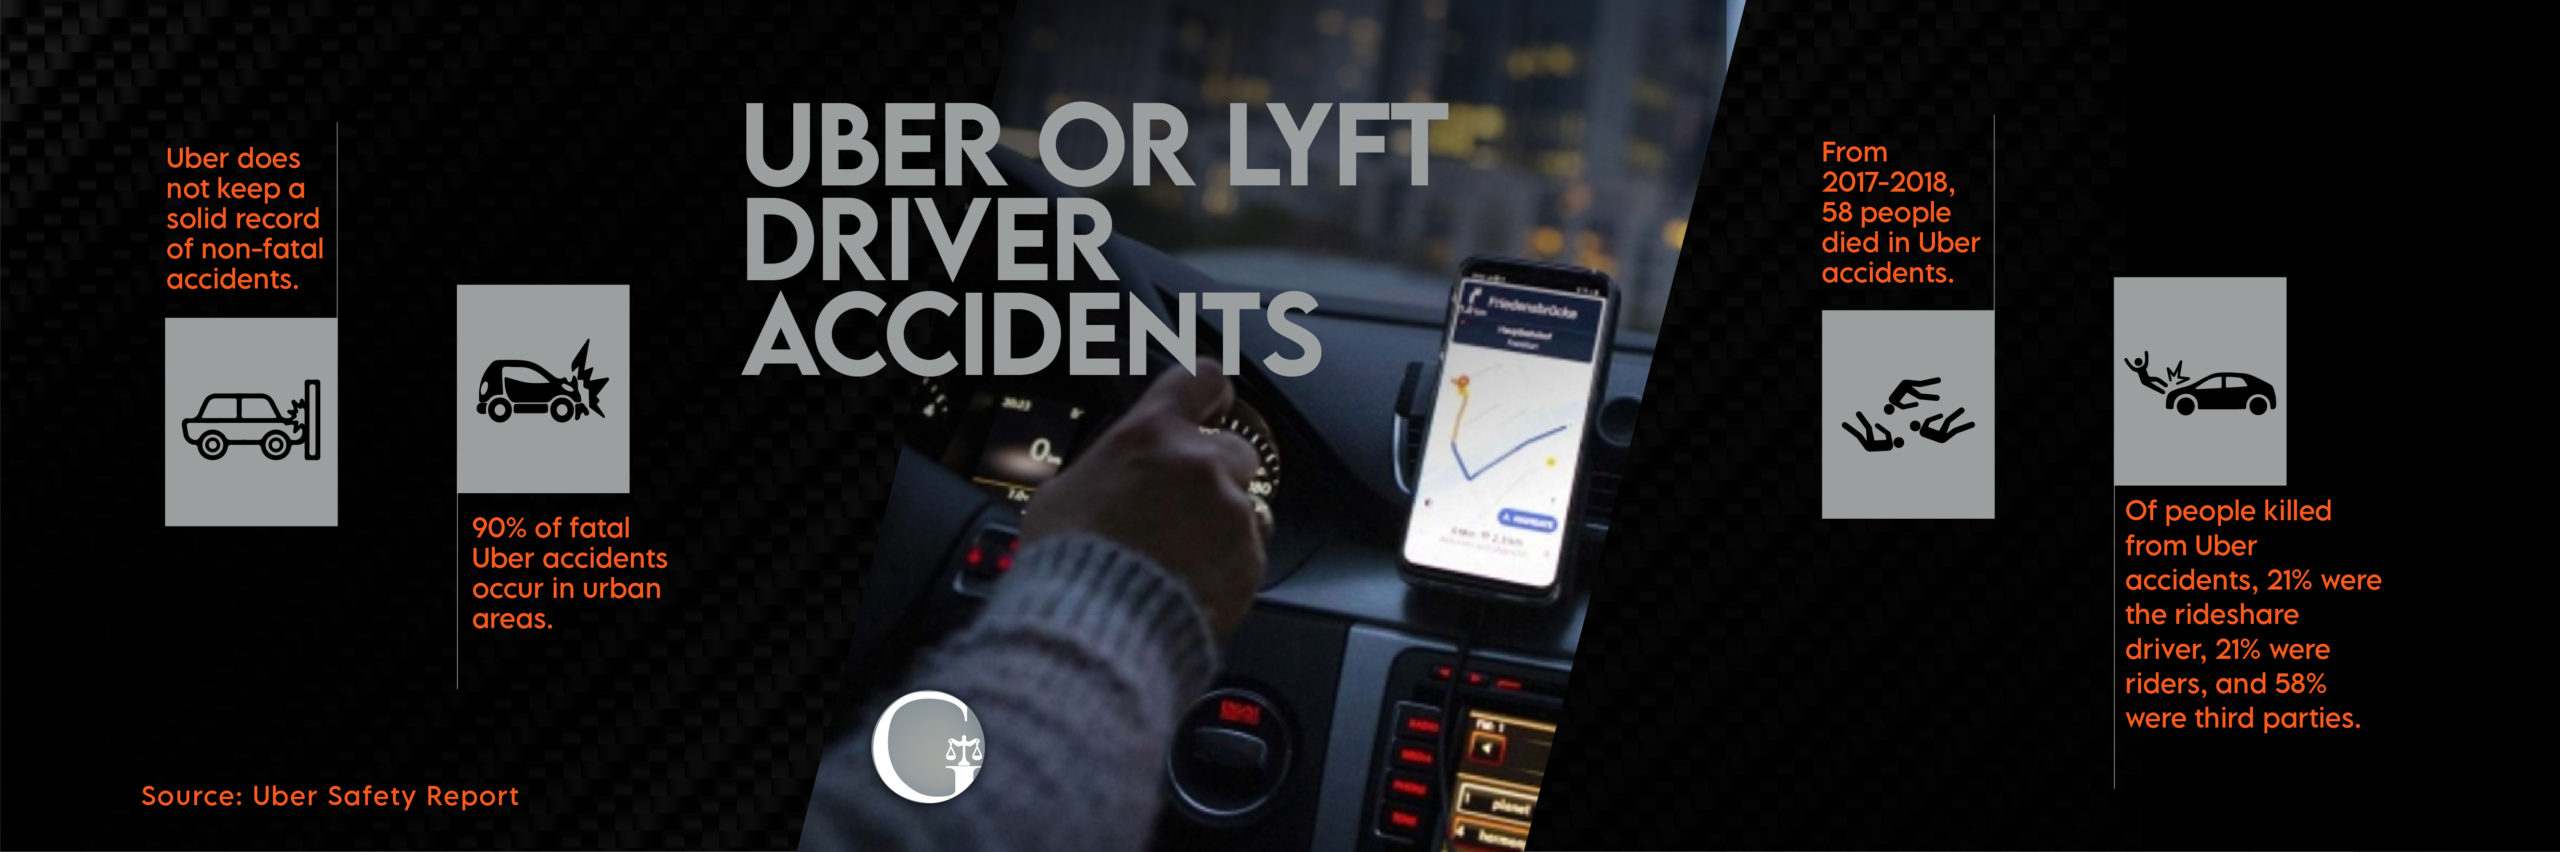 NEED A LAWYER FOR ALTO RIDESHARE ACCIDENTS IN LOS ANGELES? - Omega Law Group